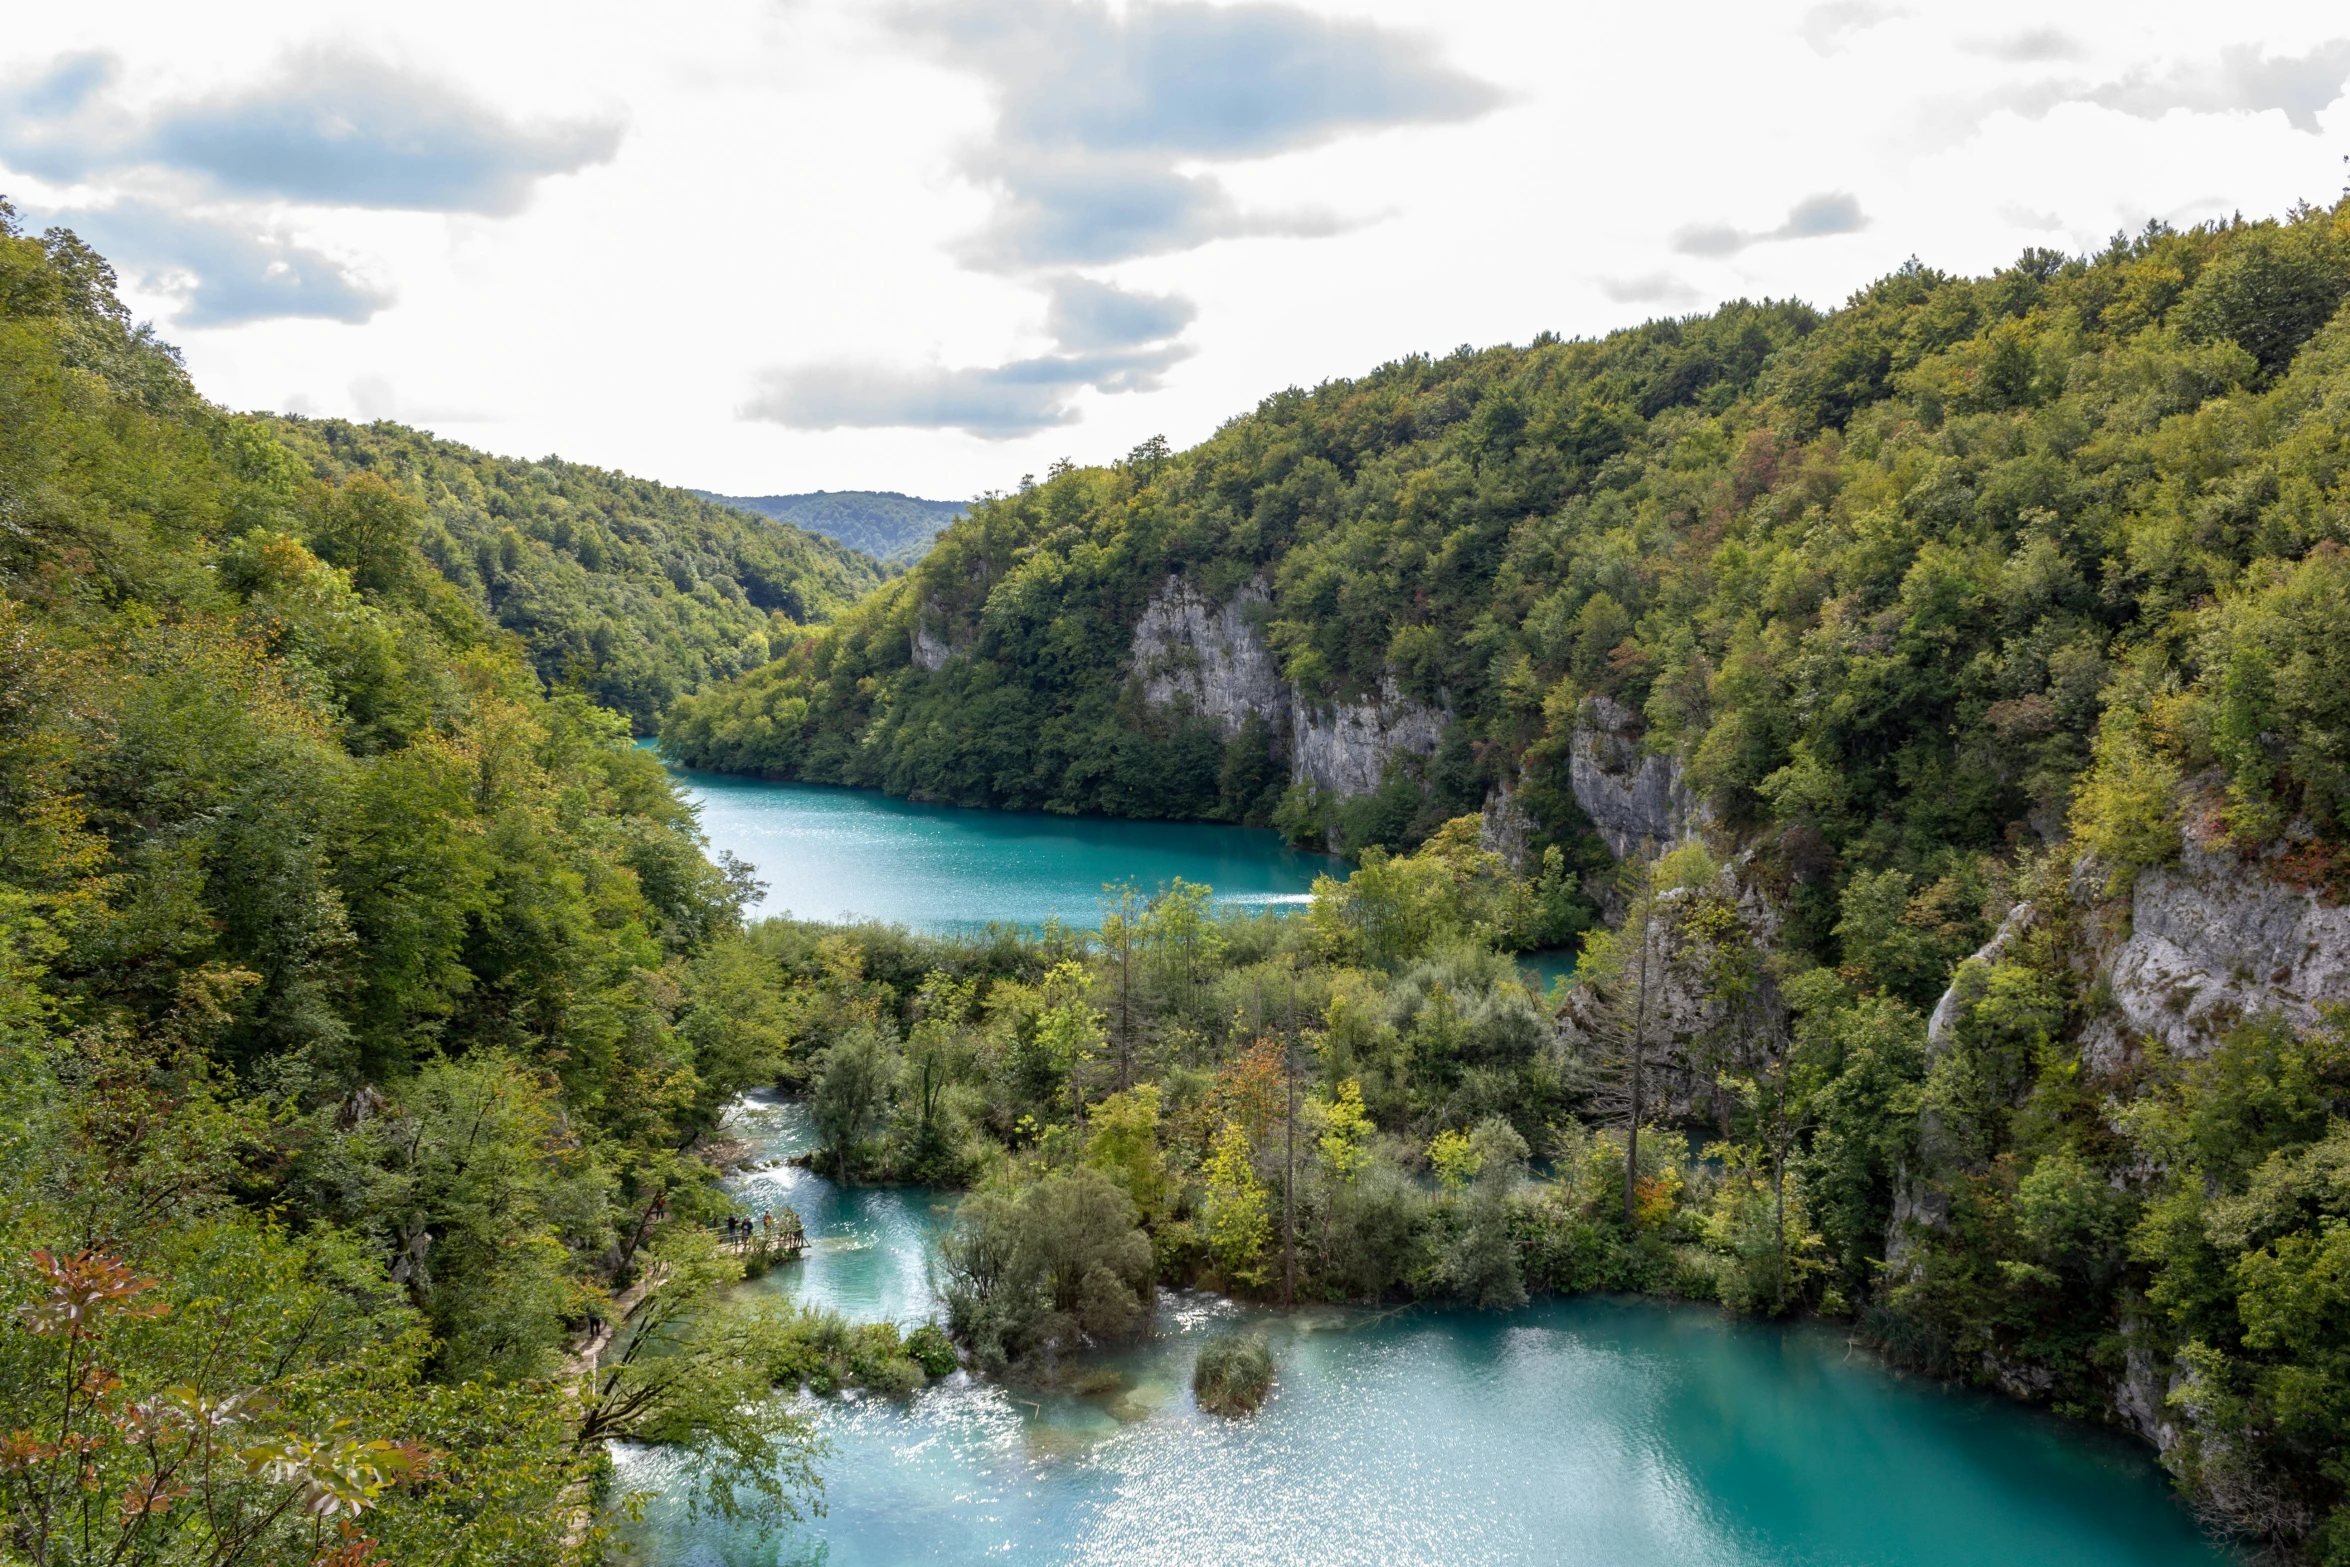 a deep green gorge with blue water surrounded by trees